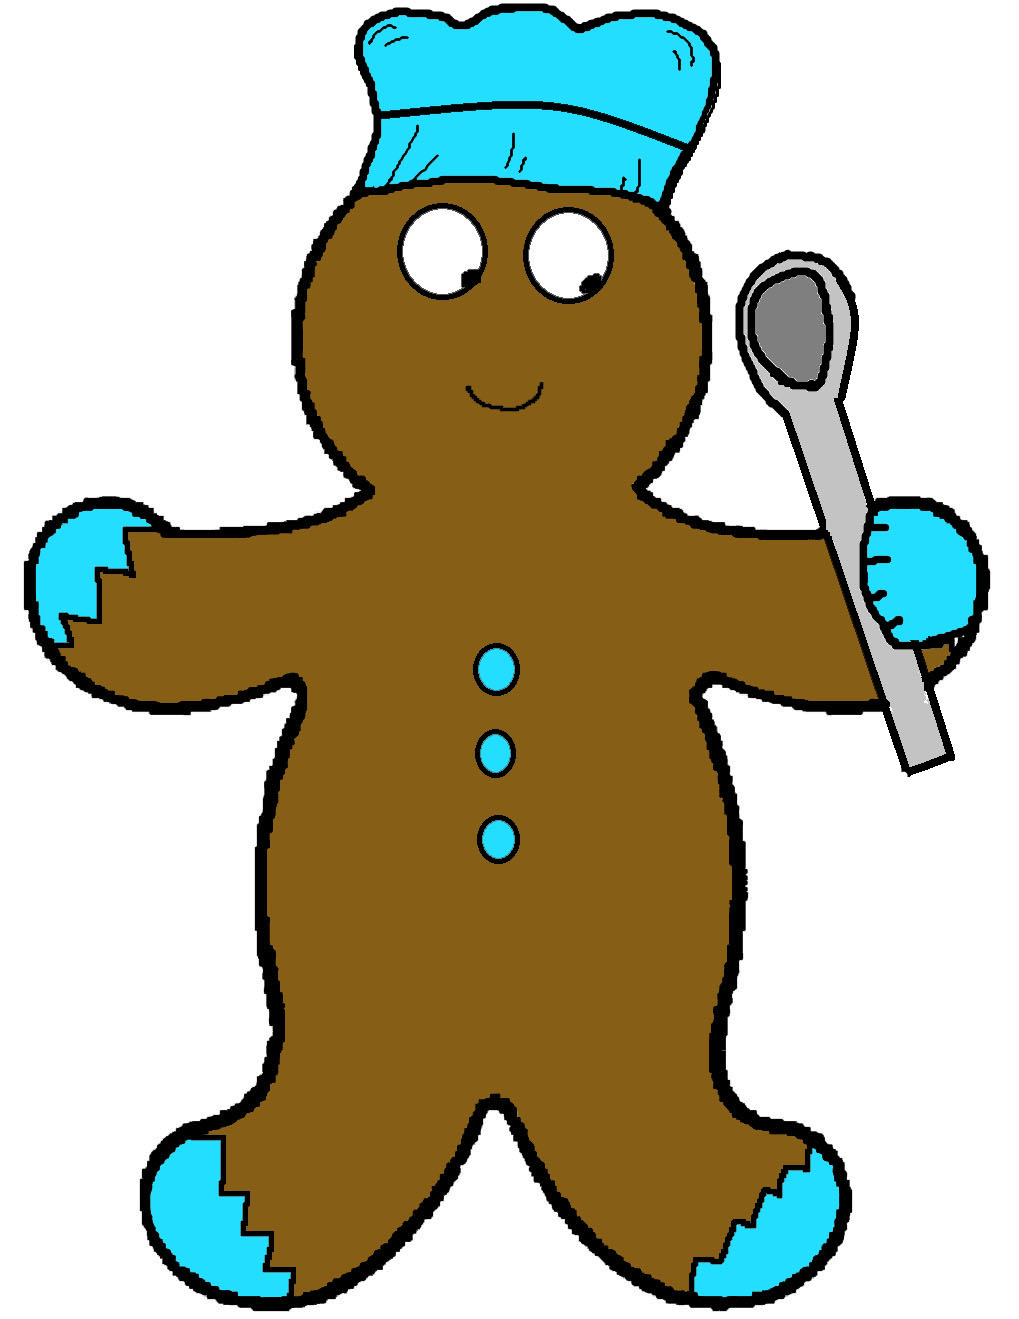 Free Christmas Gingerbread Crafts and Ornaments Such as Cutouts For Kids in Sunday school class by Church House Collection